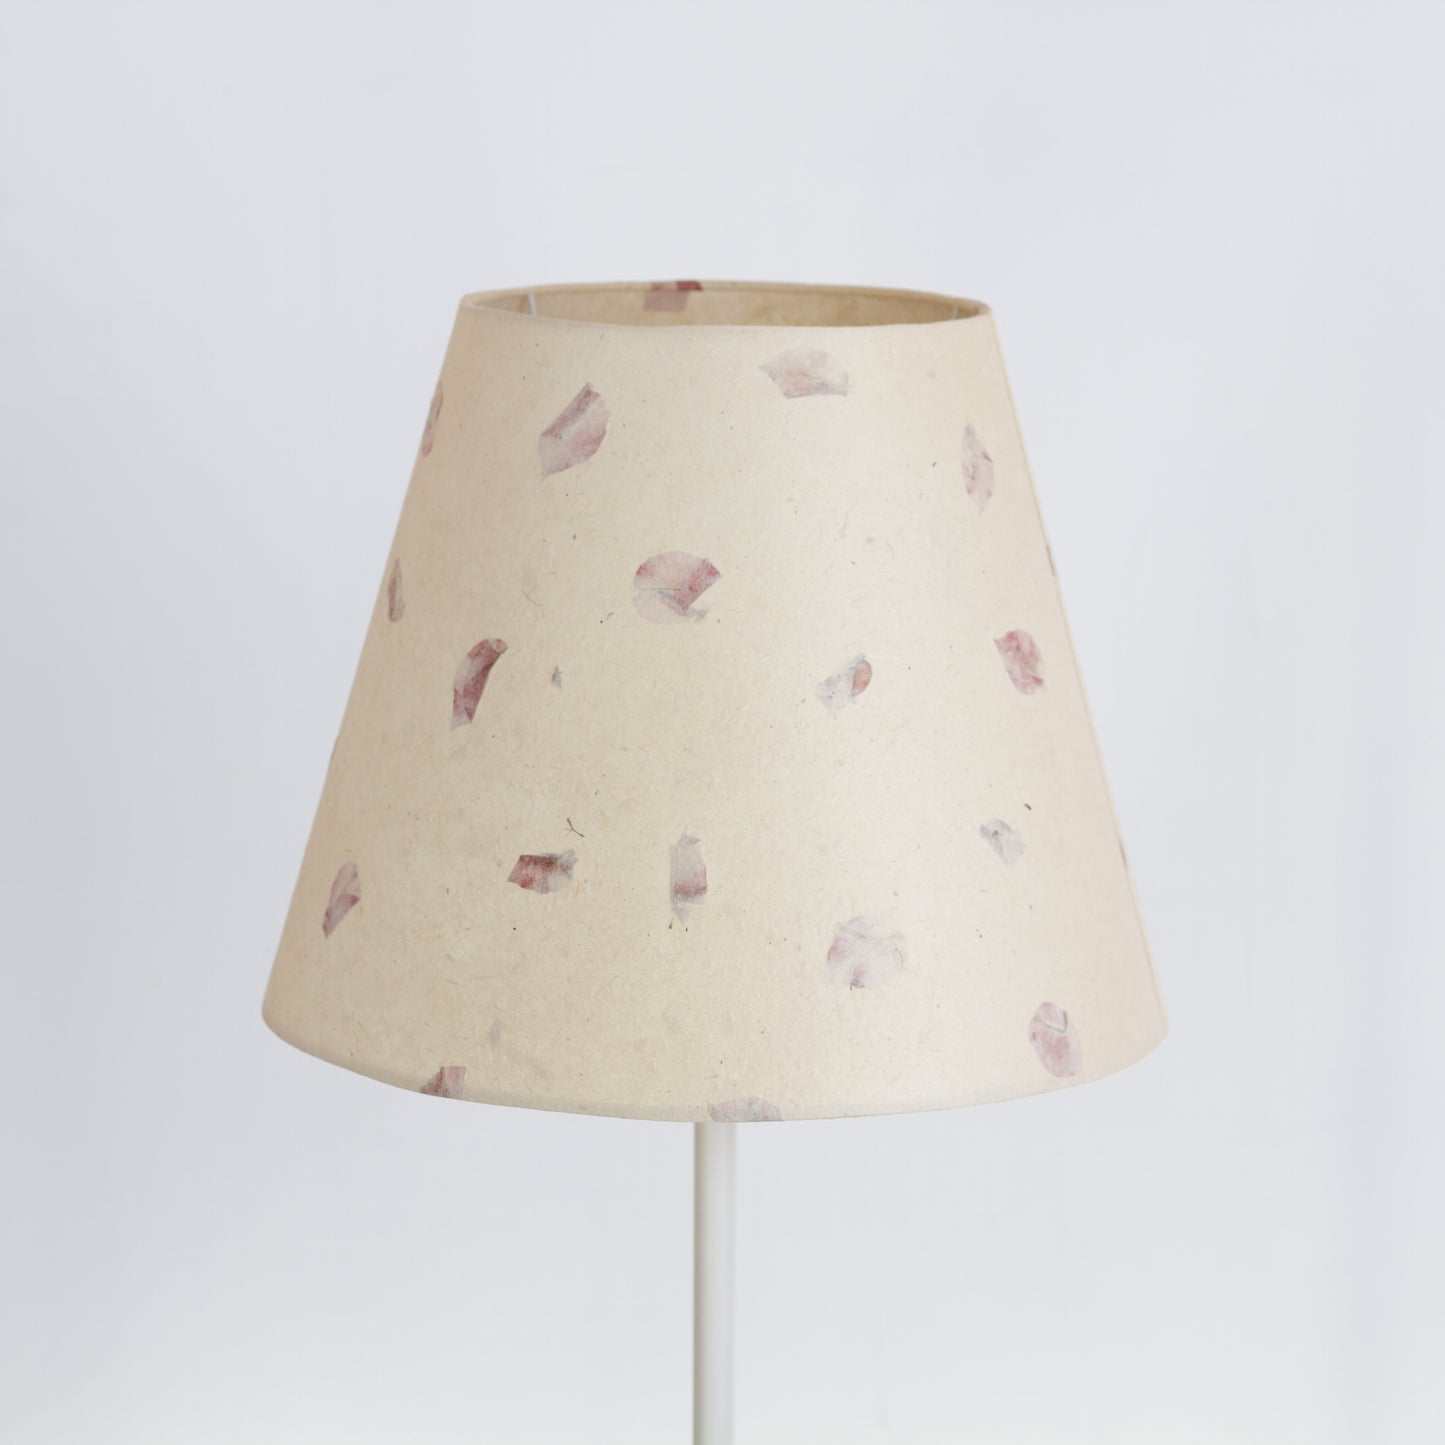 Conical Lamp Shade P33 - Rose Petals on Natural Lokta, 23cm(top) x 40cm(bottom) x 31cm(height)